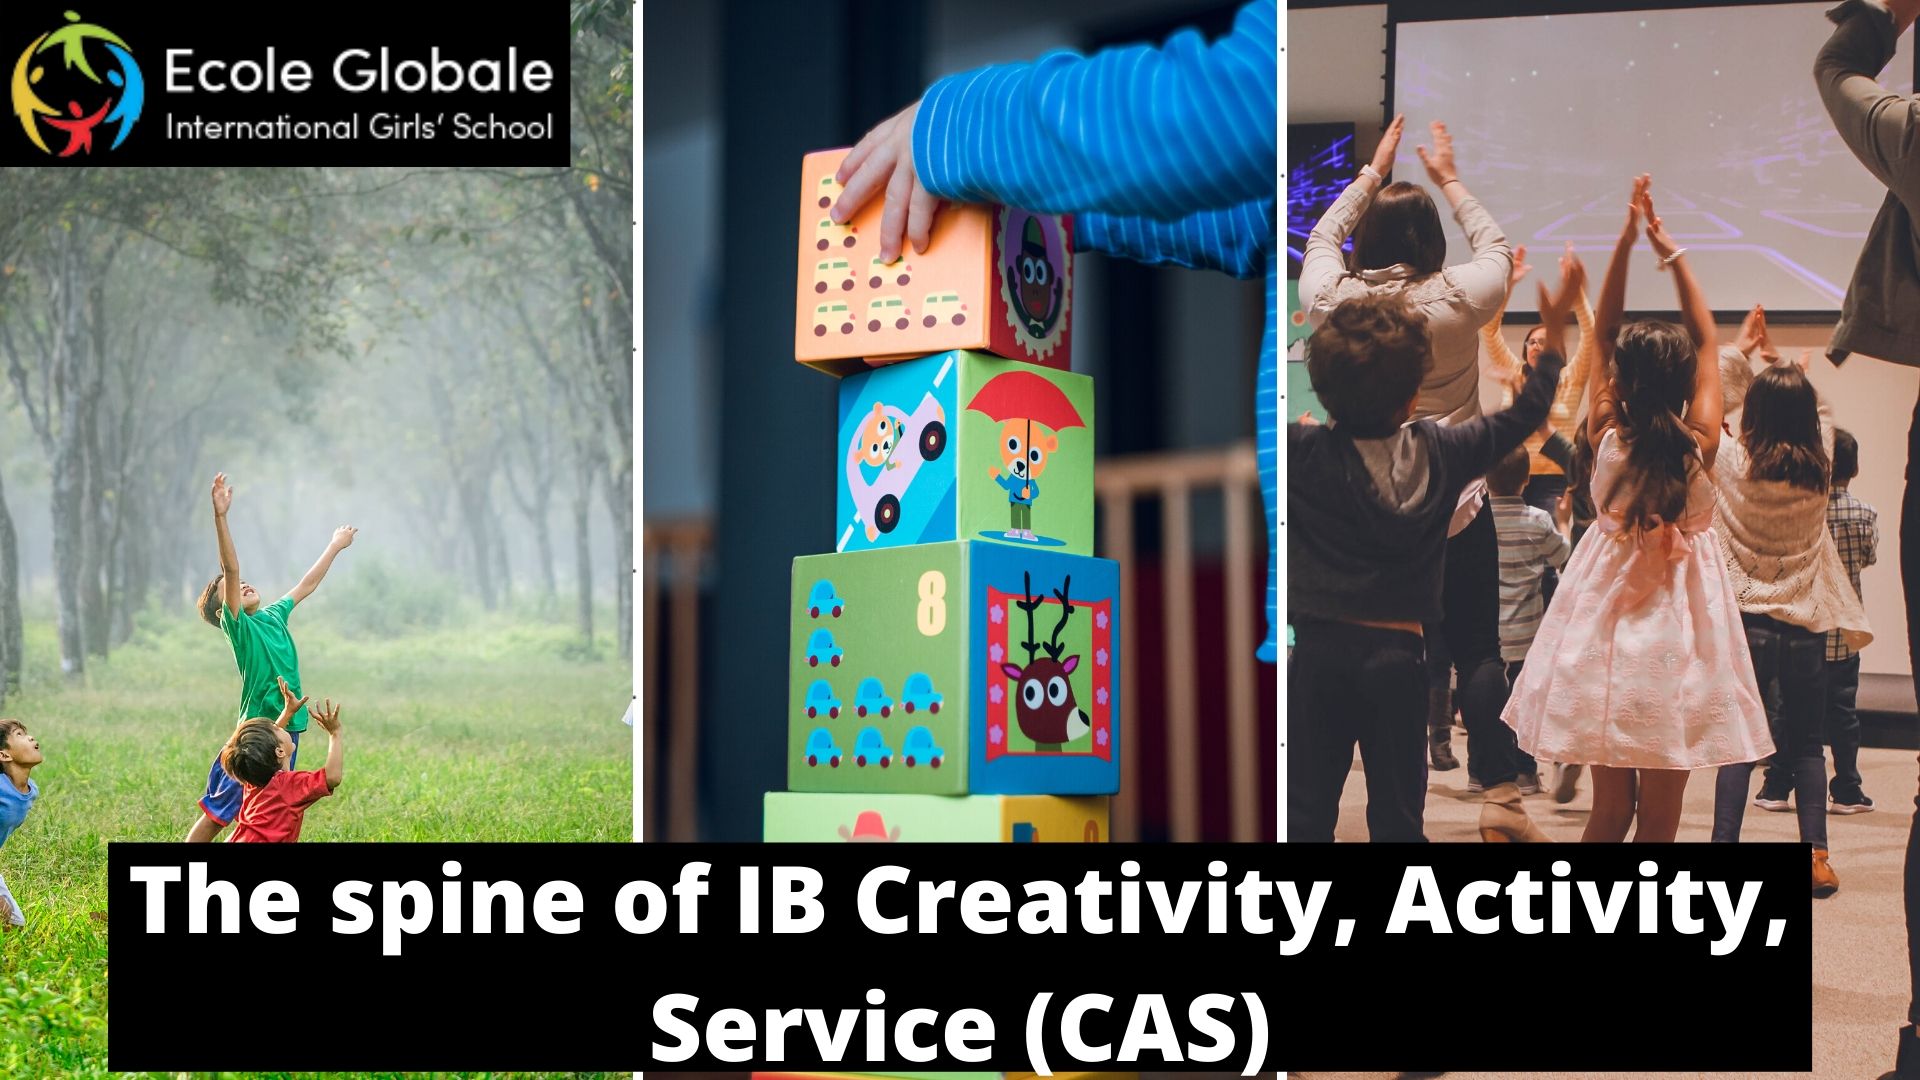 You are currently viewing The spine of IB Creativity, Activity, Service (CAS)